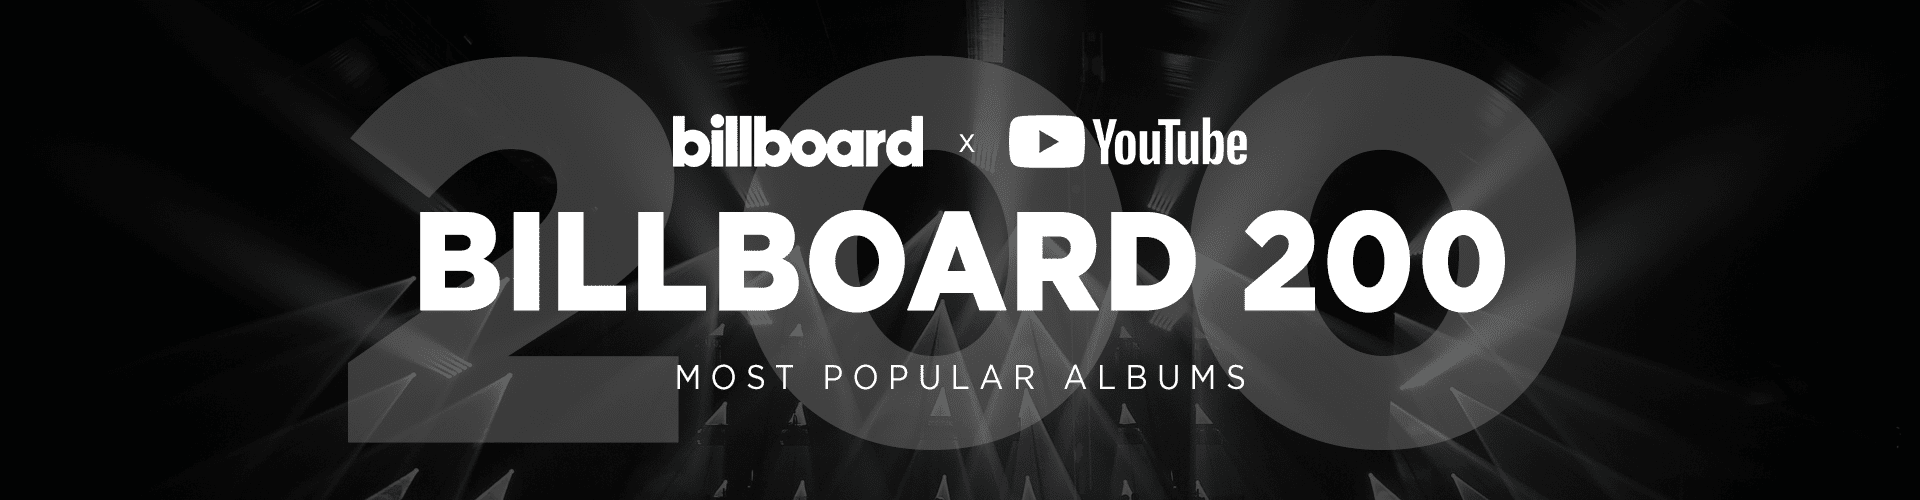 Billboard Announces Including YouTube Streams In Its Album Charts ...